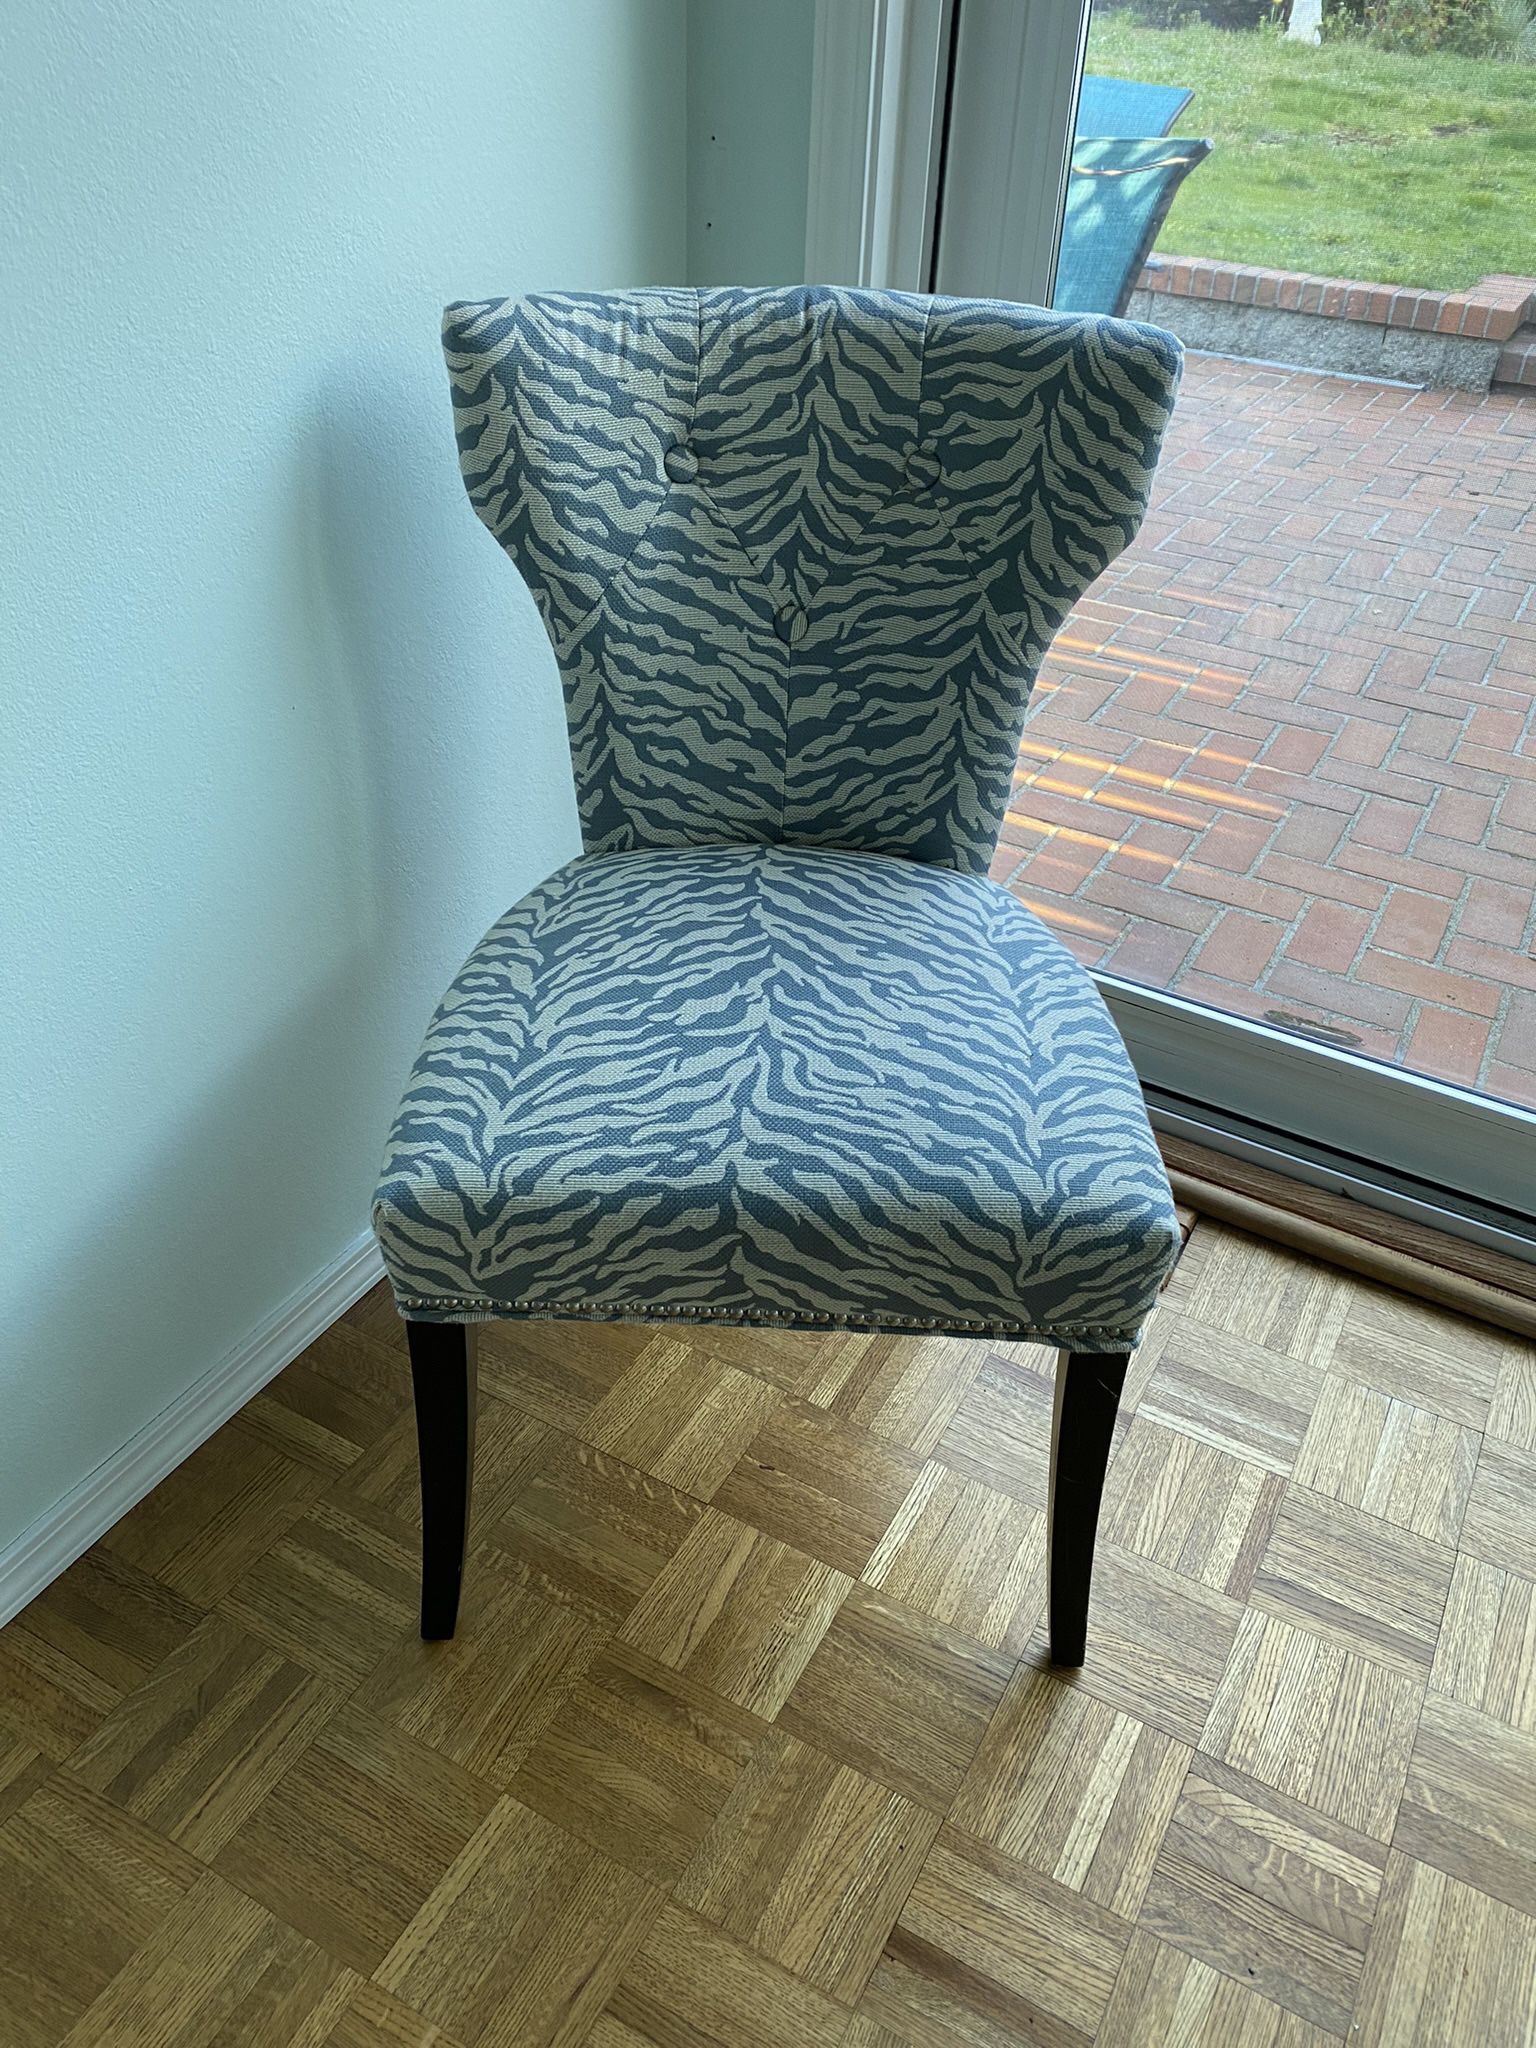 Grey and white animal print accent chair